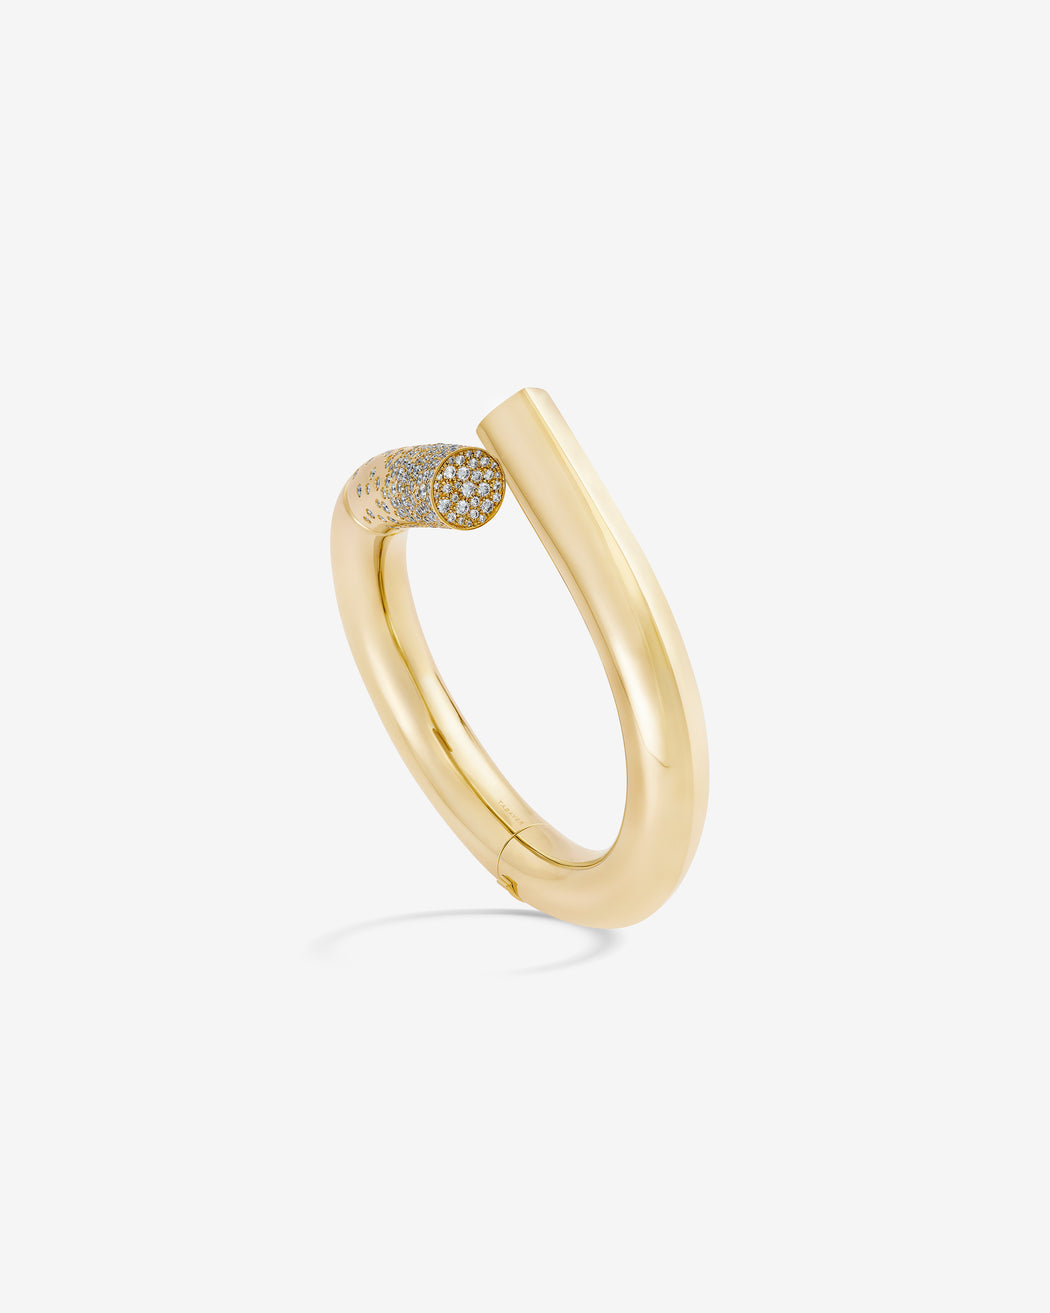 Oera bracelet 18k Fairmined yellow gold and diamonds, Tabayer ethical fine jewelry